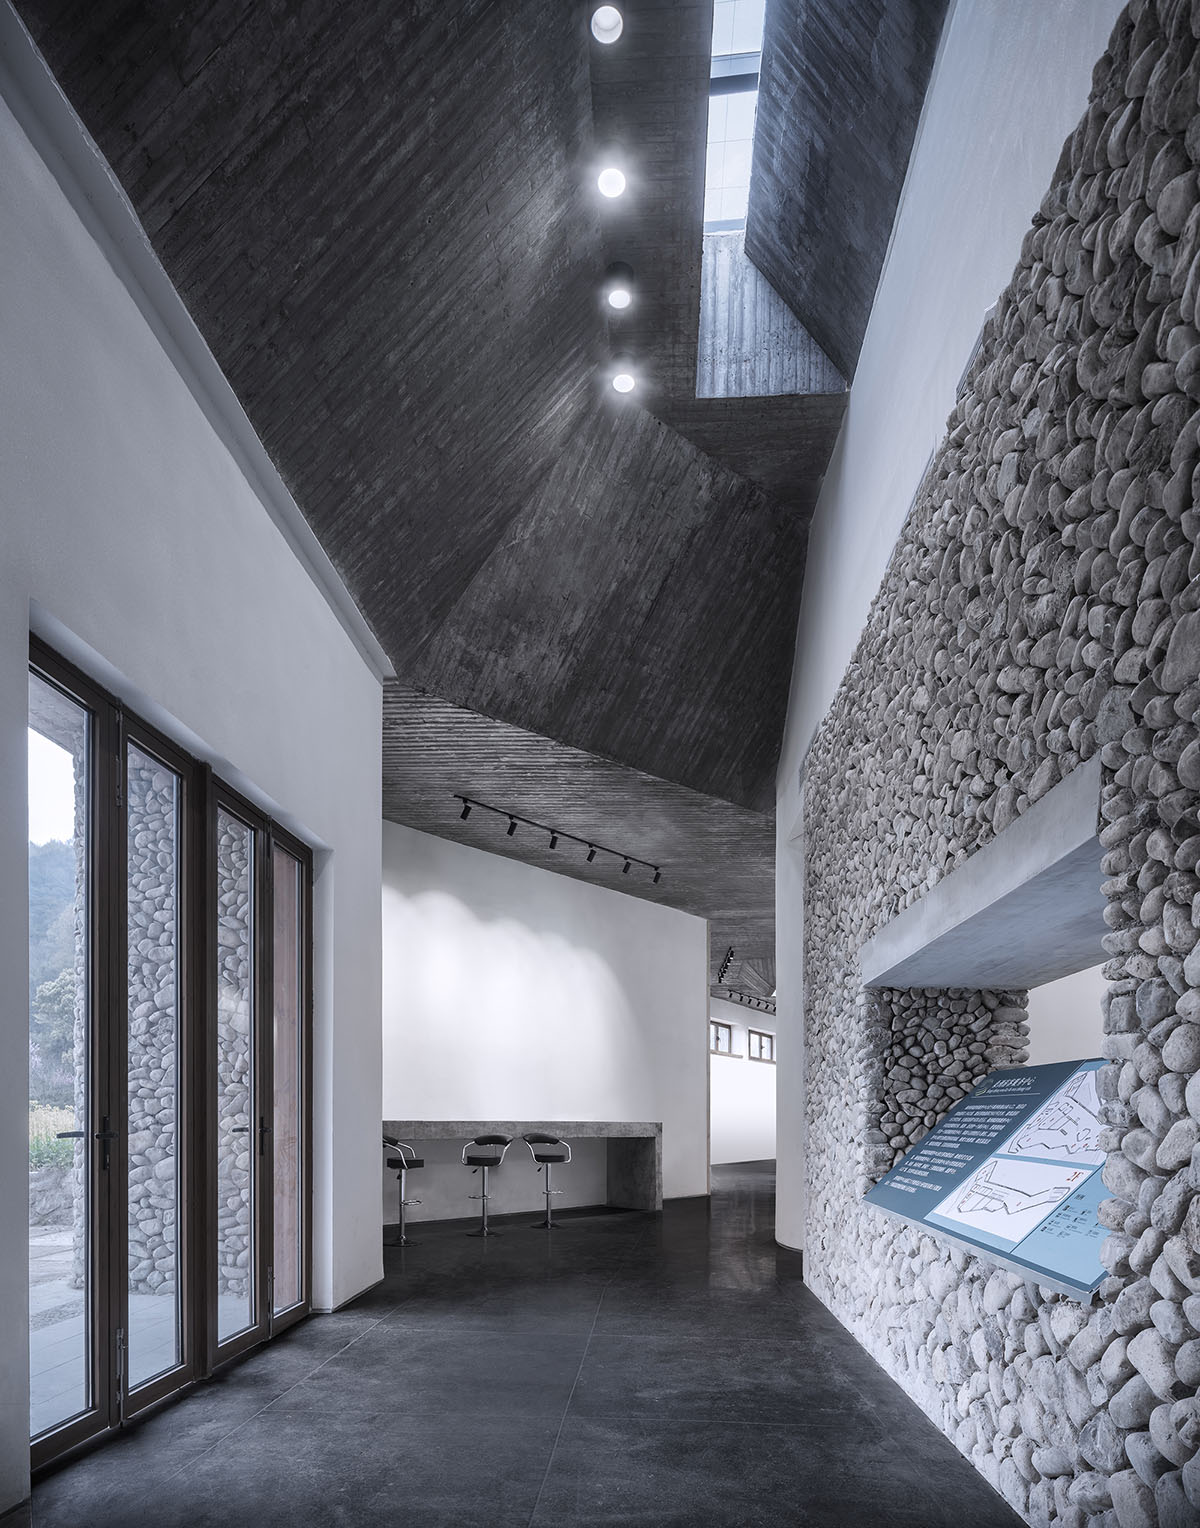 UAD built culture and history museum with terraced stone walls mimicking the site's landform 